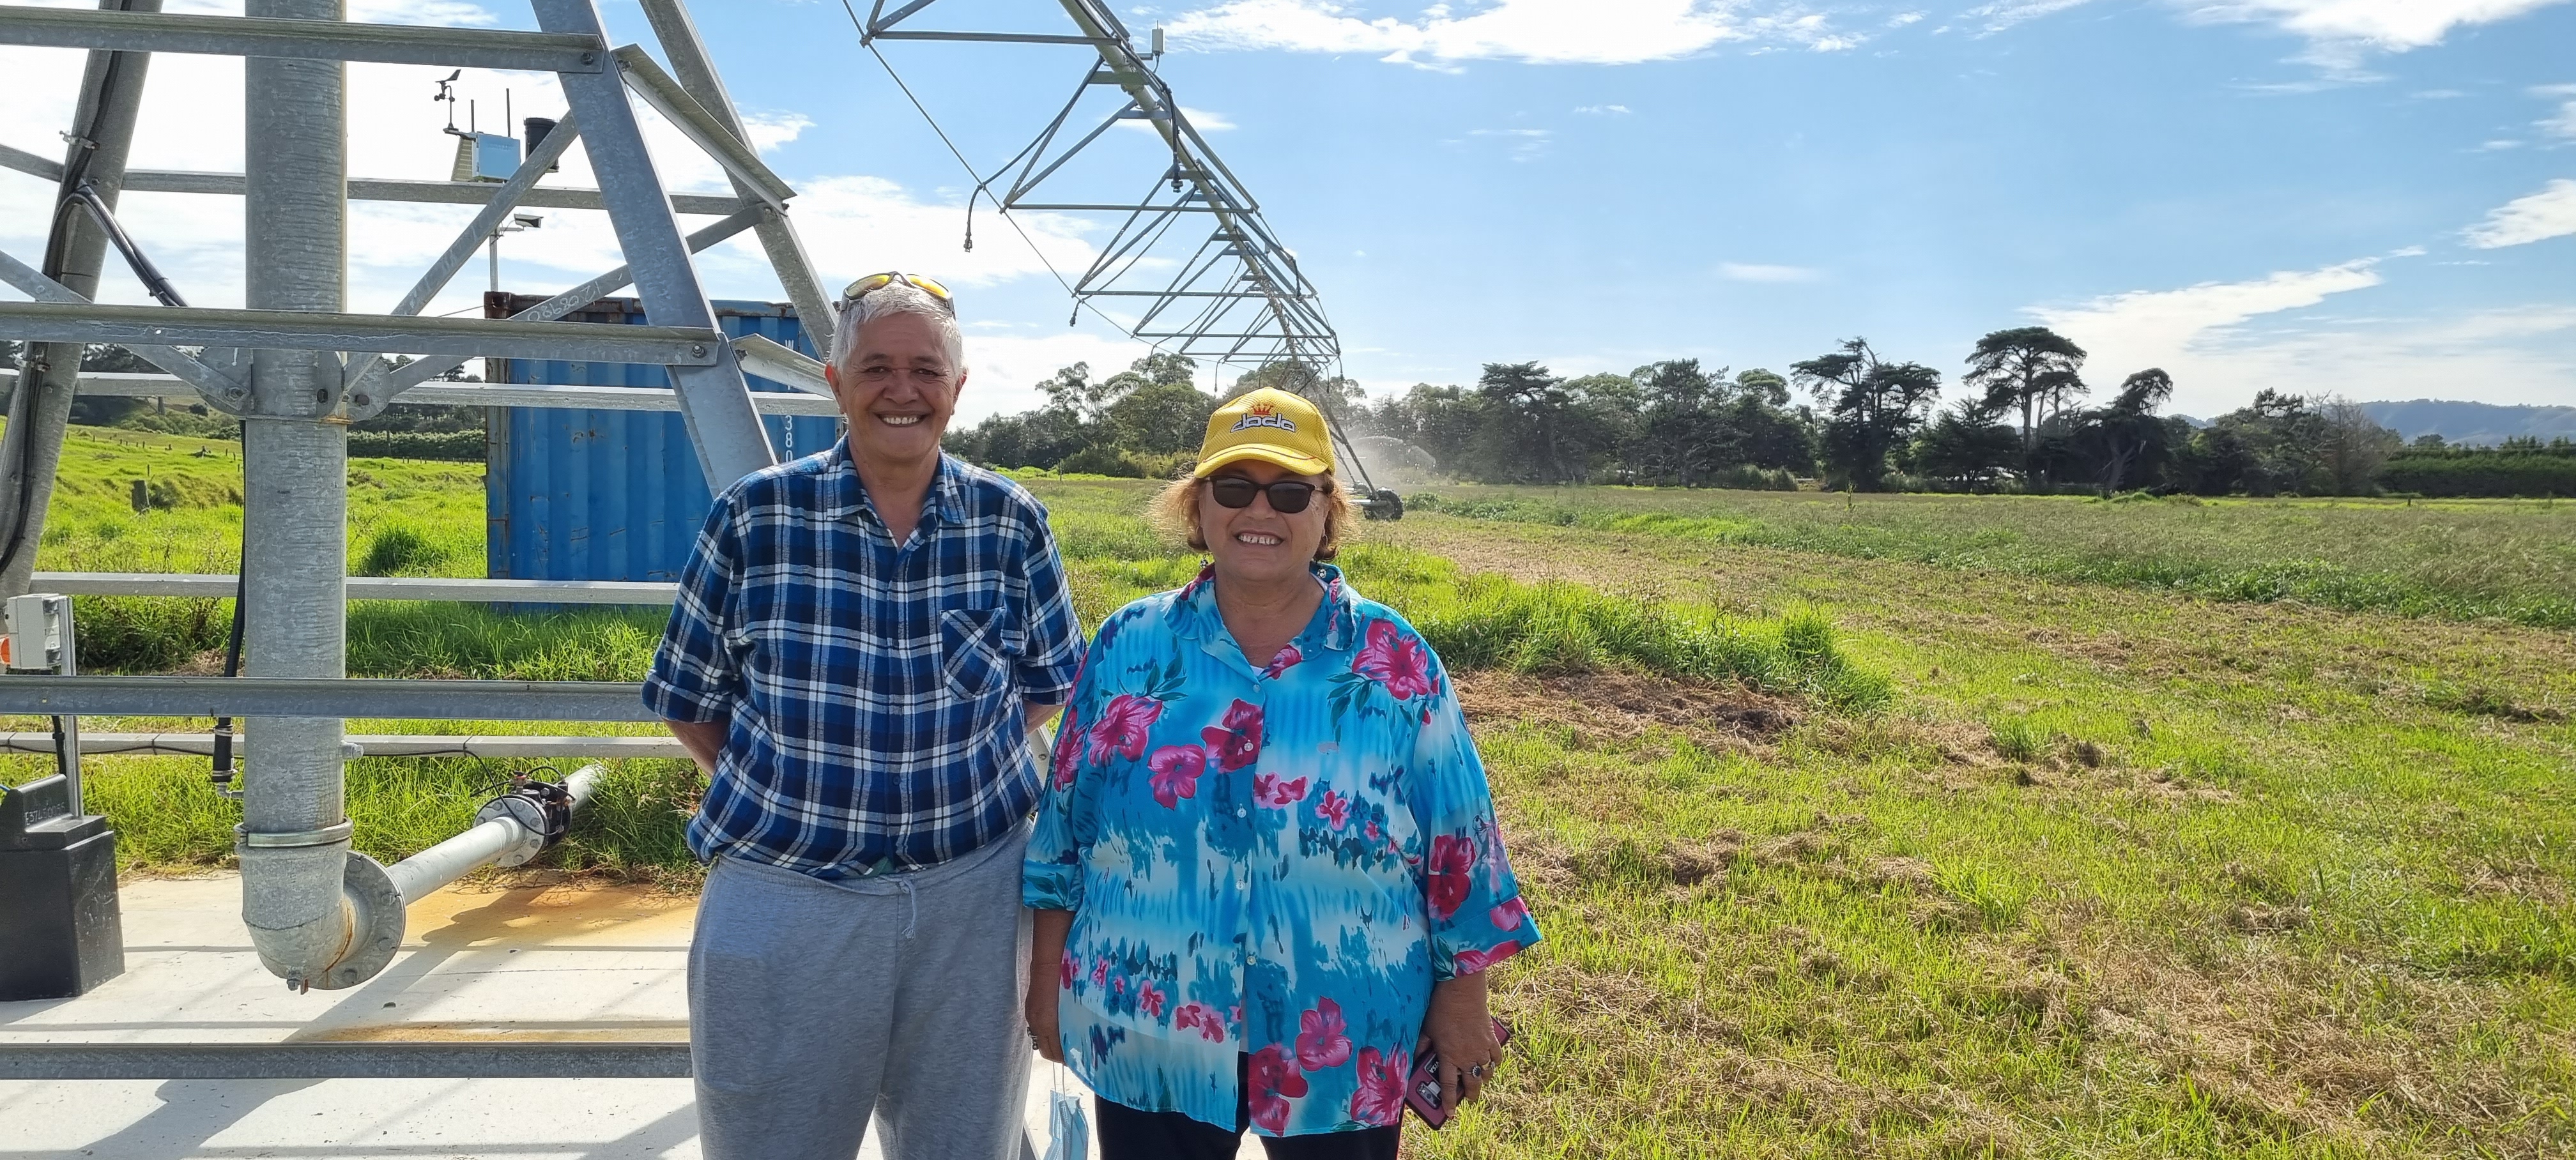 Grace le Gros of Māuri Orā ki Ngāti Whatua Charitable Trust services stand with her colleague on Site 2. The centre pivot irrigator supplying the water to the site is shown in the background.